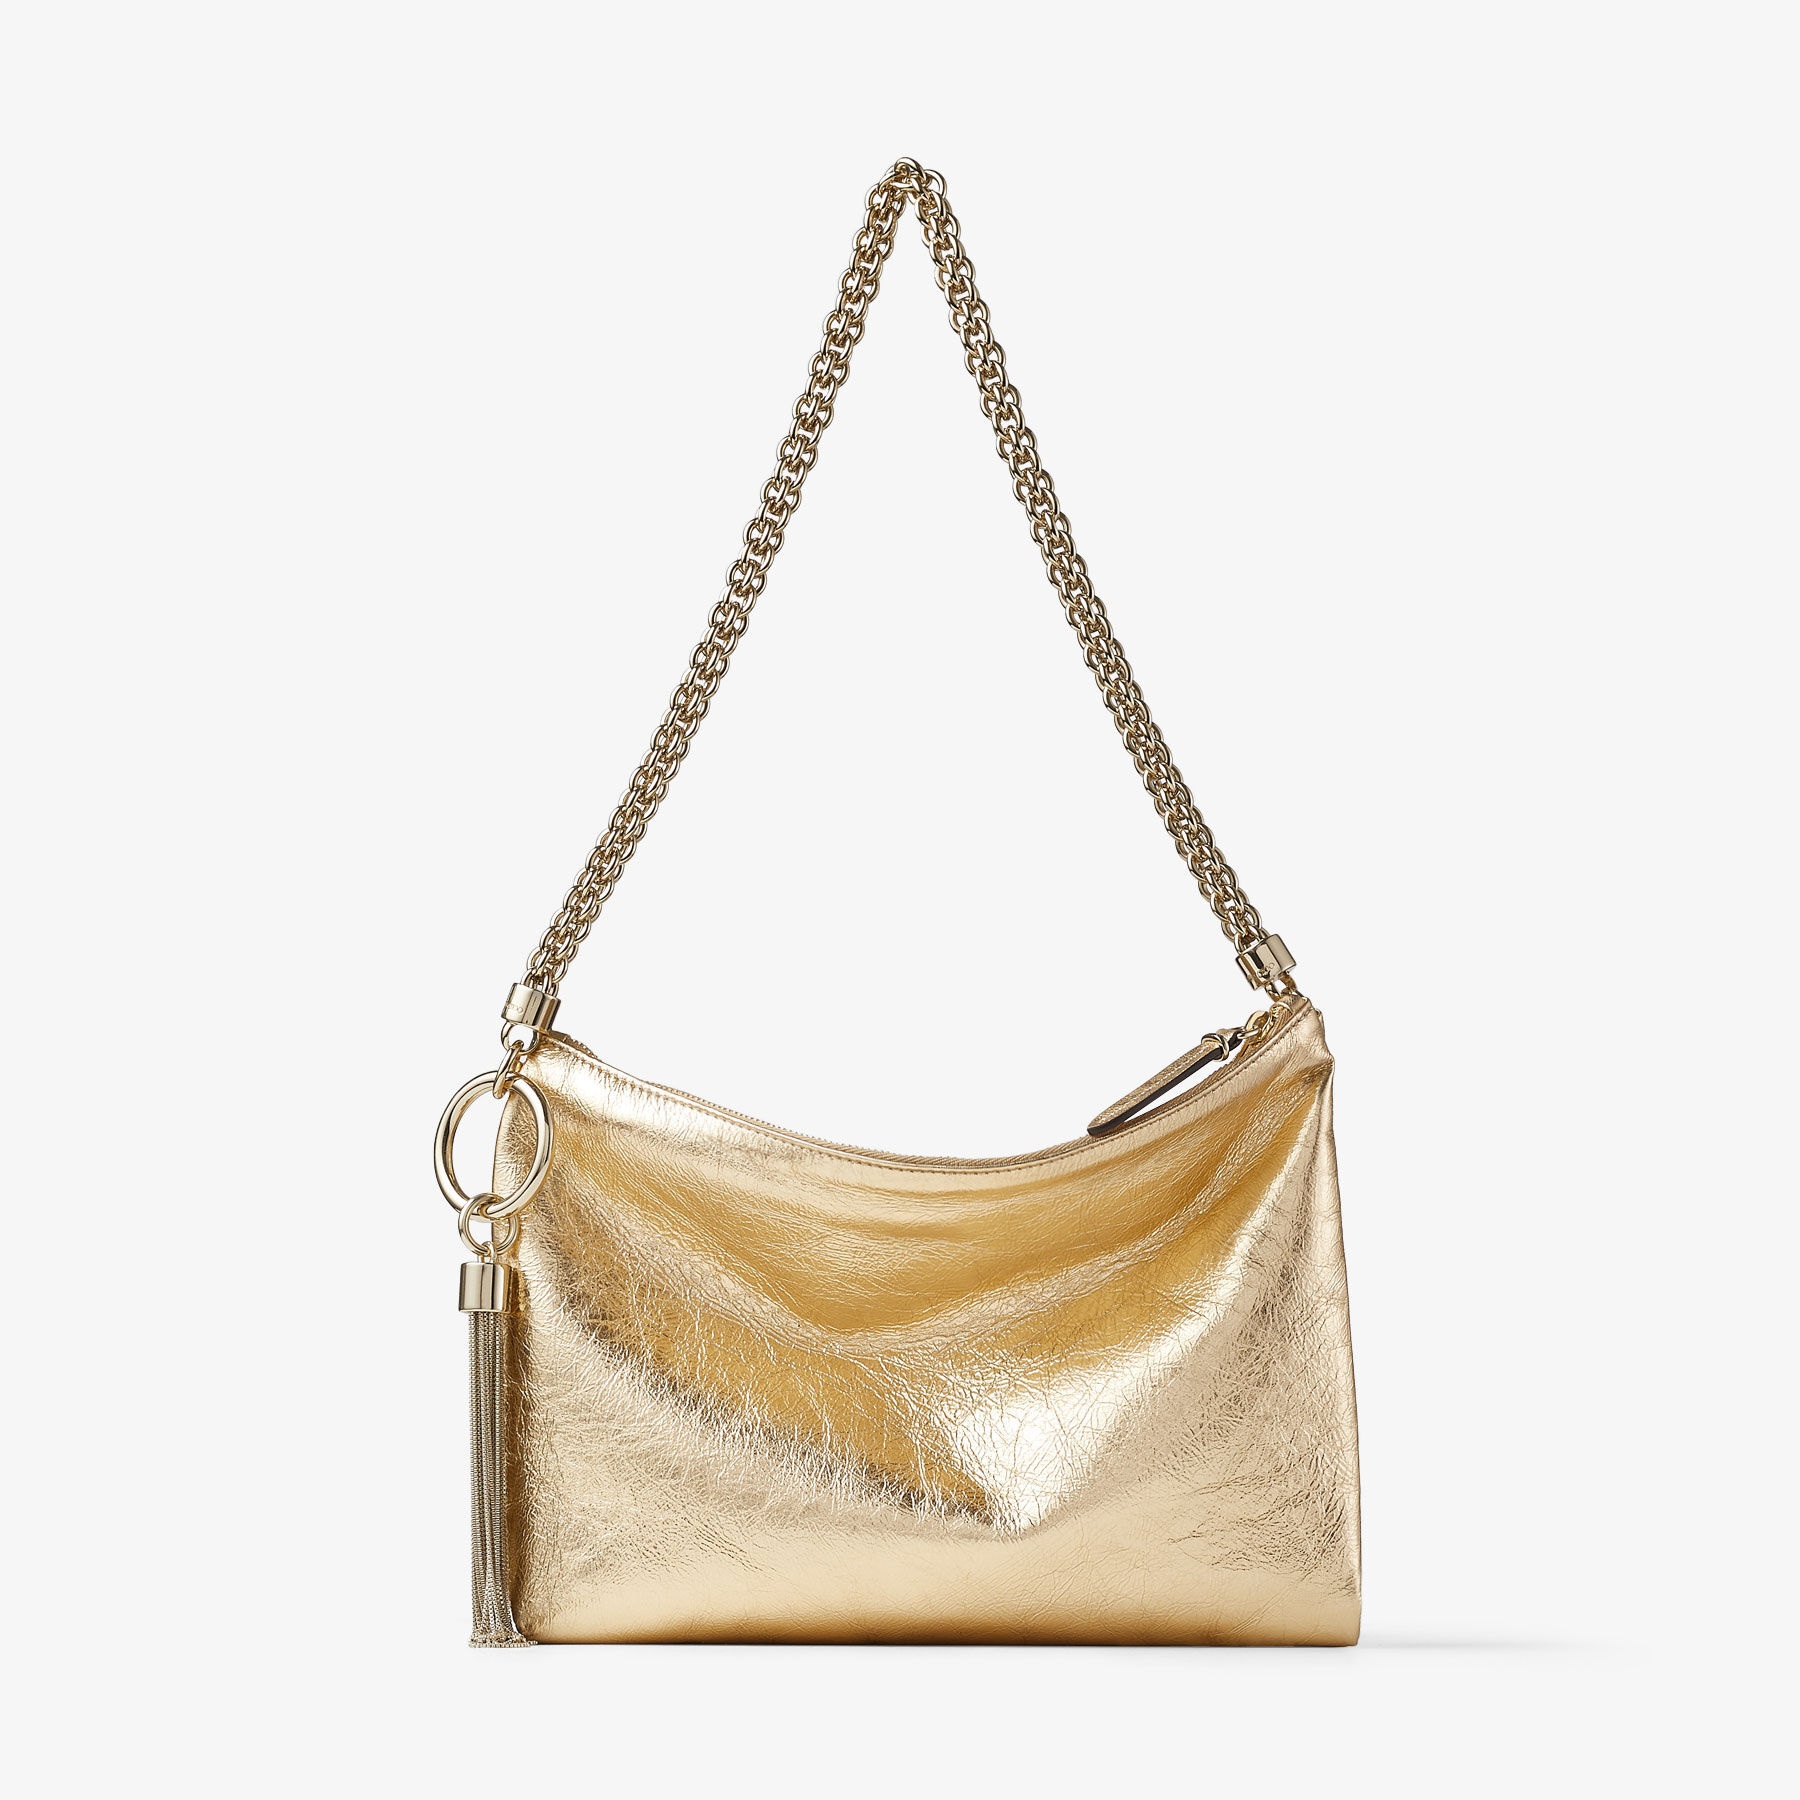 Callie Shoulder
Gold Metallic Nappa Shoulder Bag with Jimmy Choo Embroidery - 5